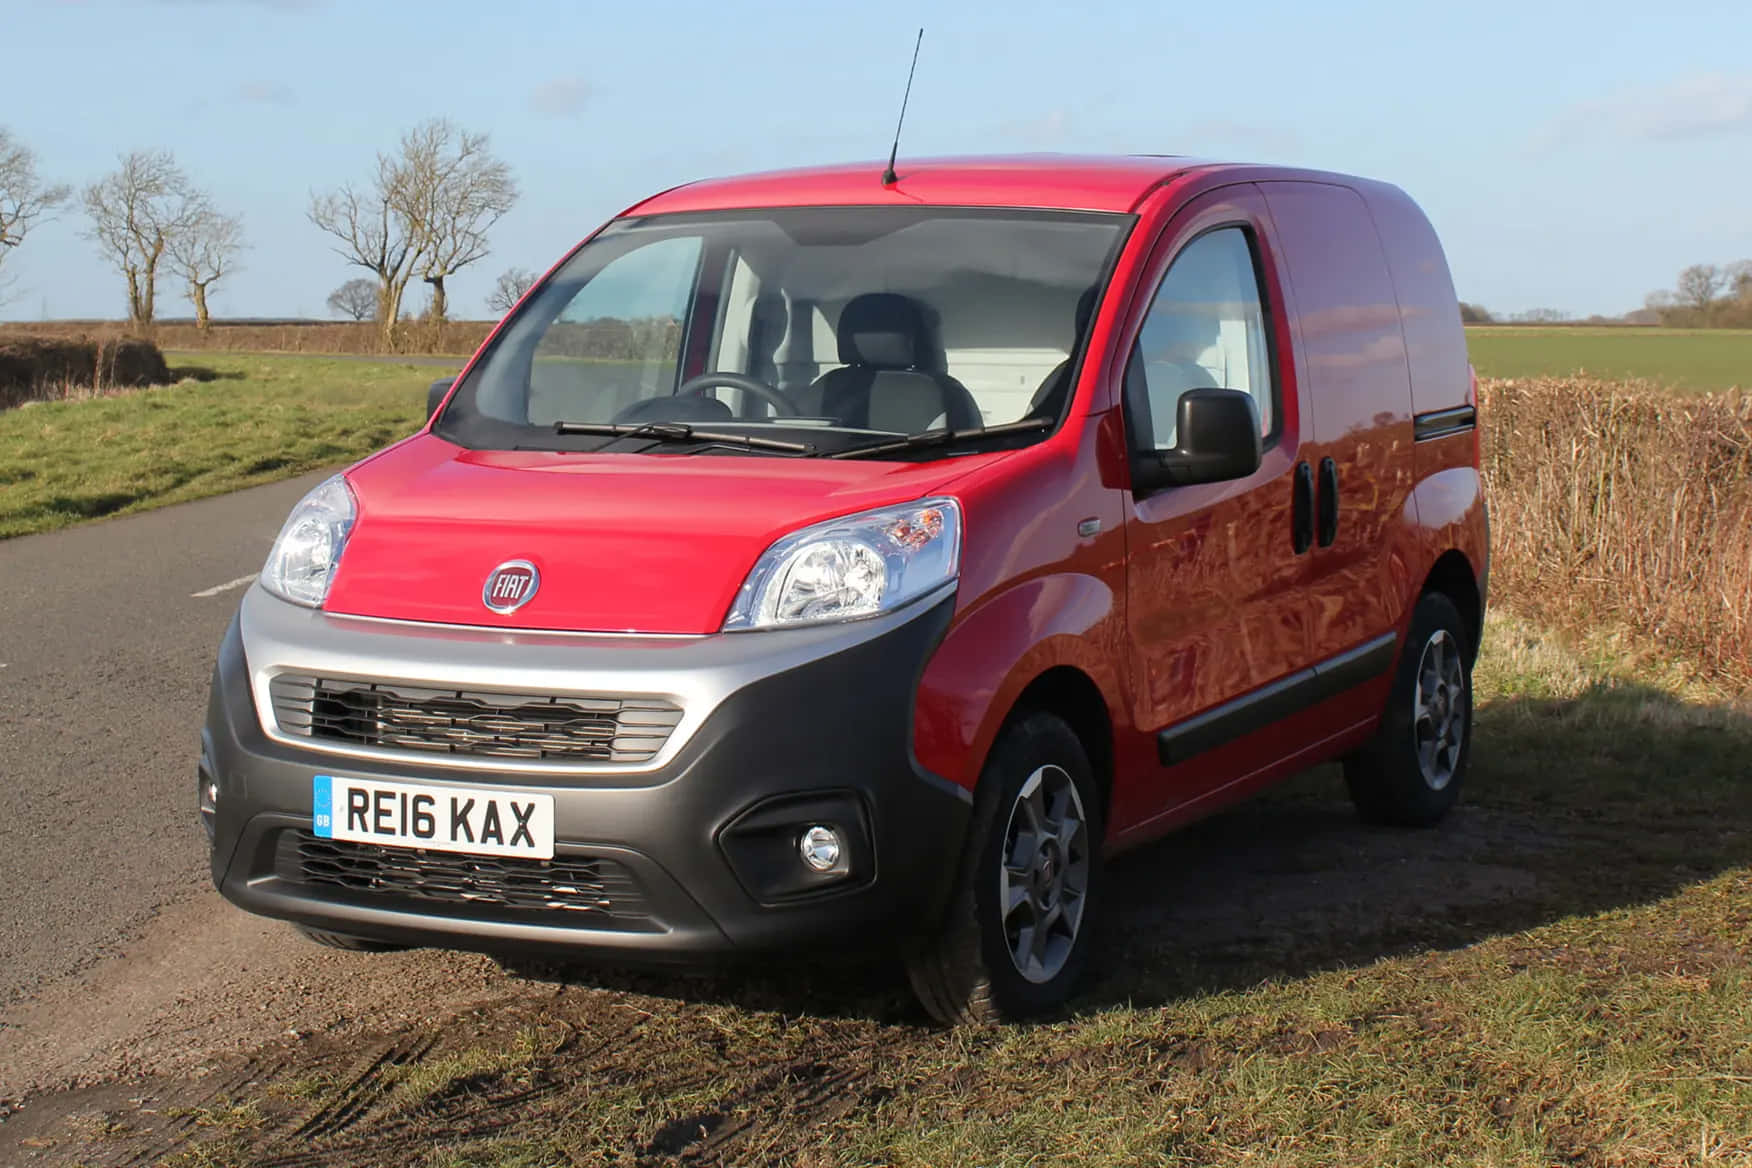 Fiat Fiorino - The perfect blend of functionality and style Wallpaper